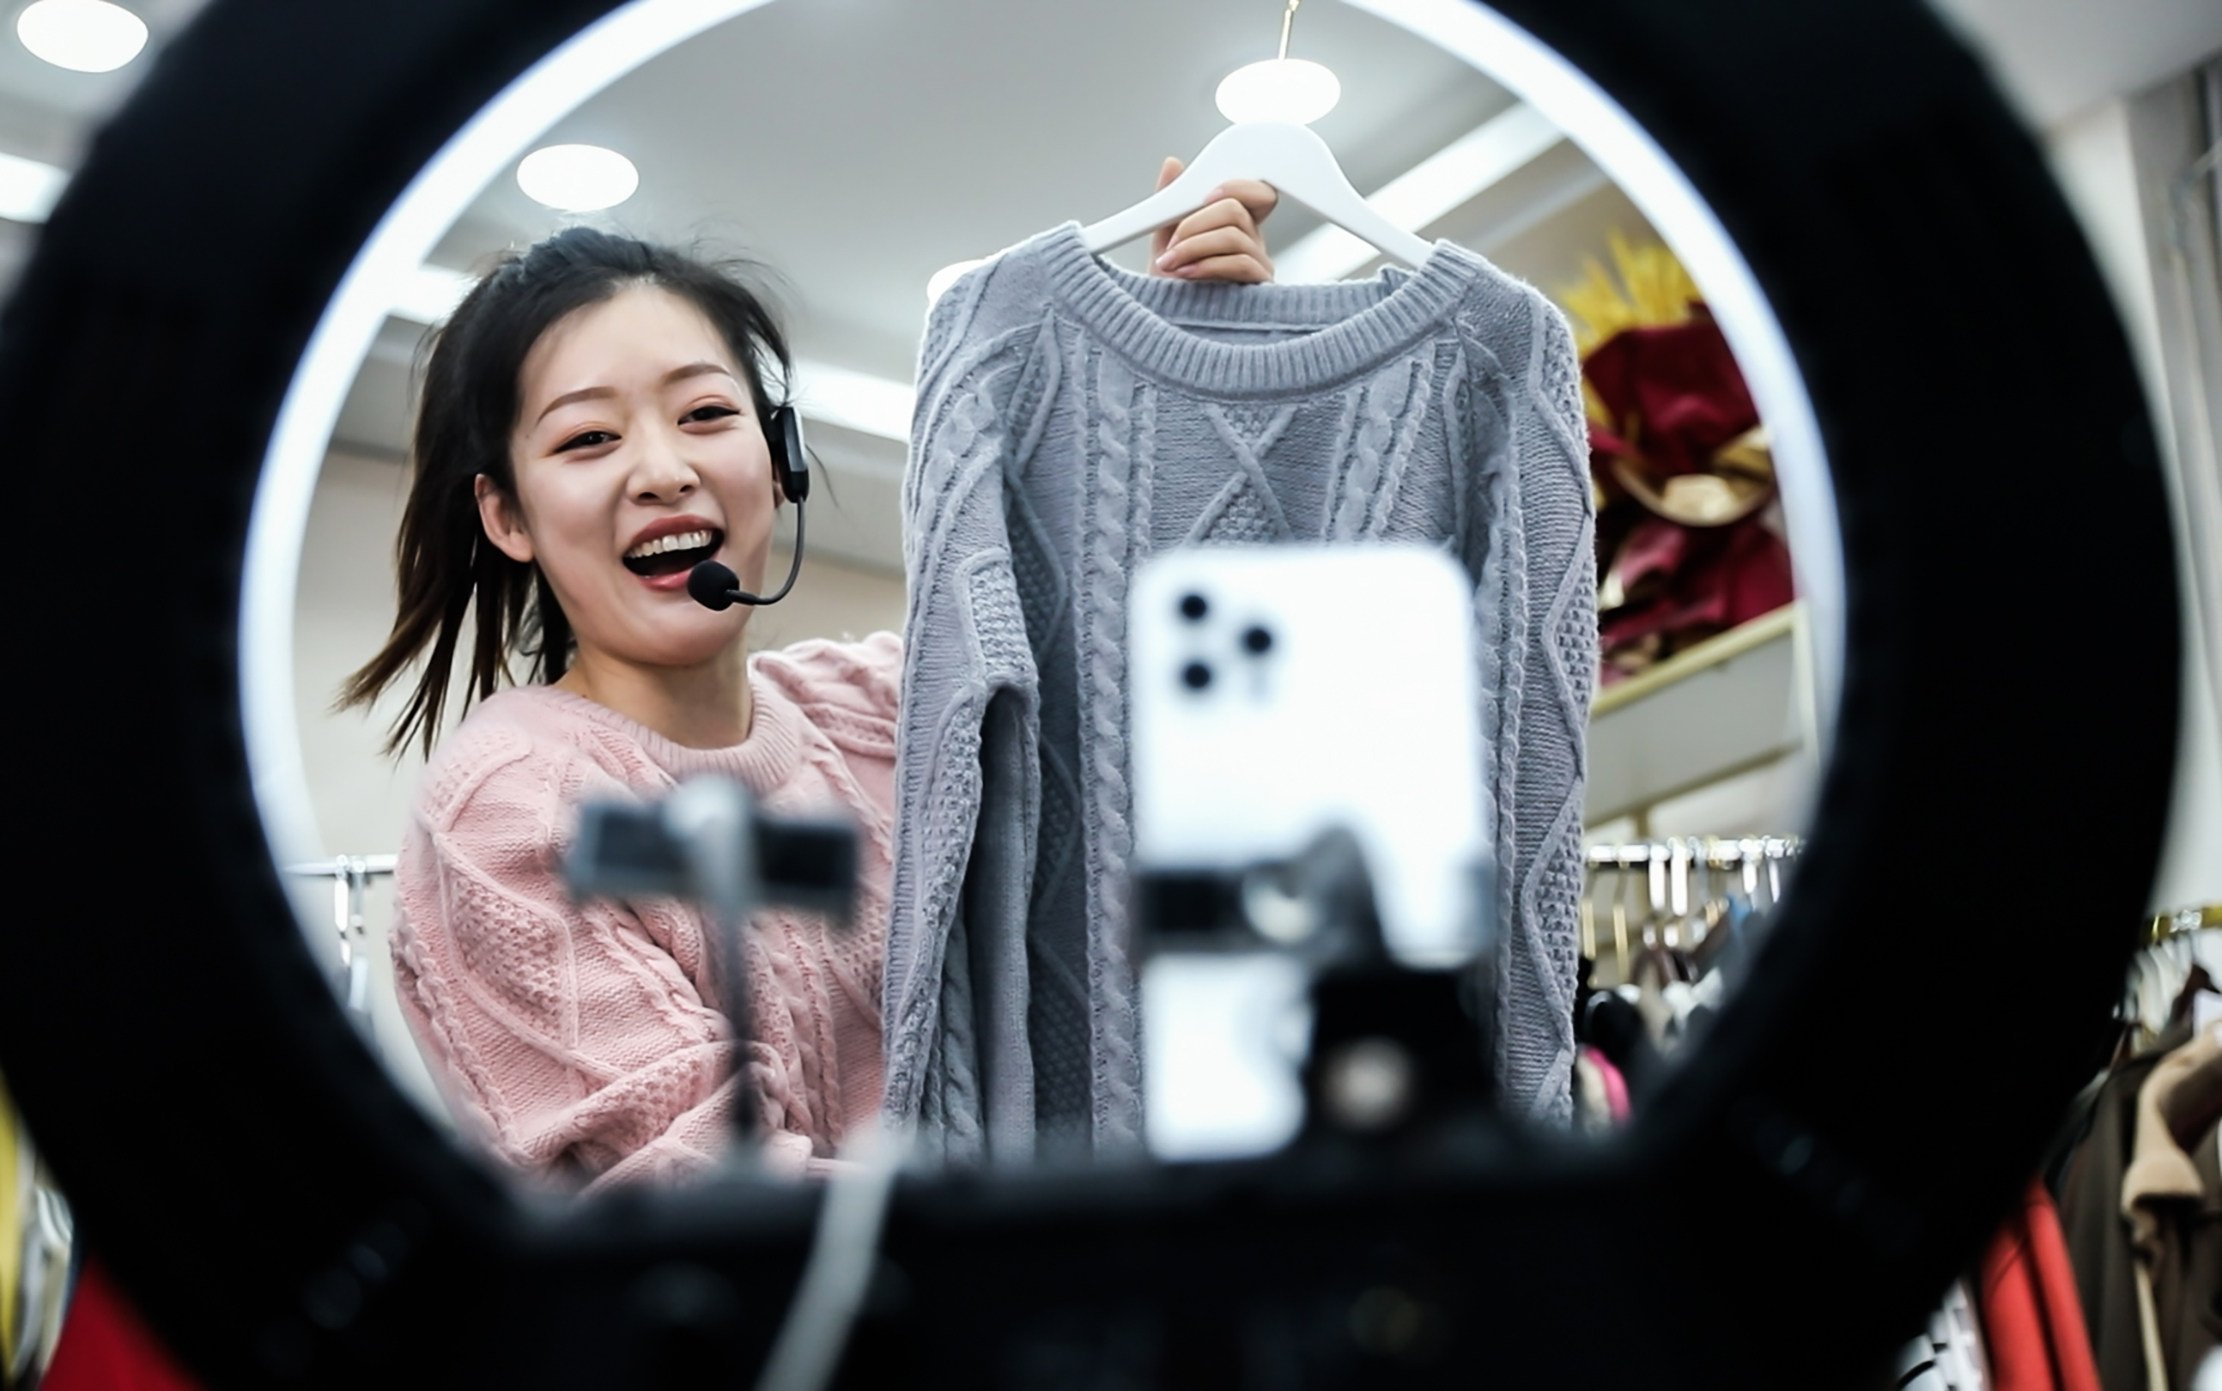 Flexible workers in China are finding employment in a range of sectors, including live-streaming and social media content creation. Photo: Getty Images